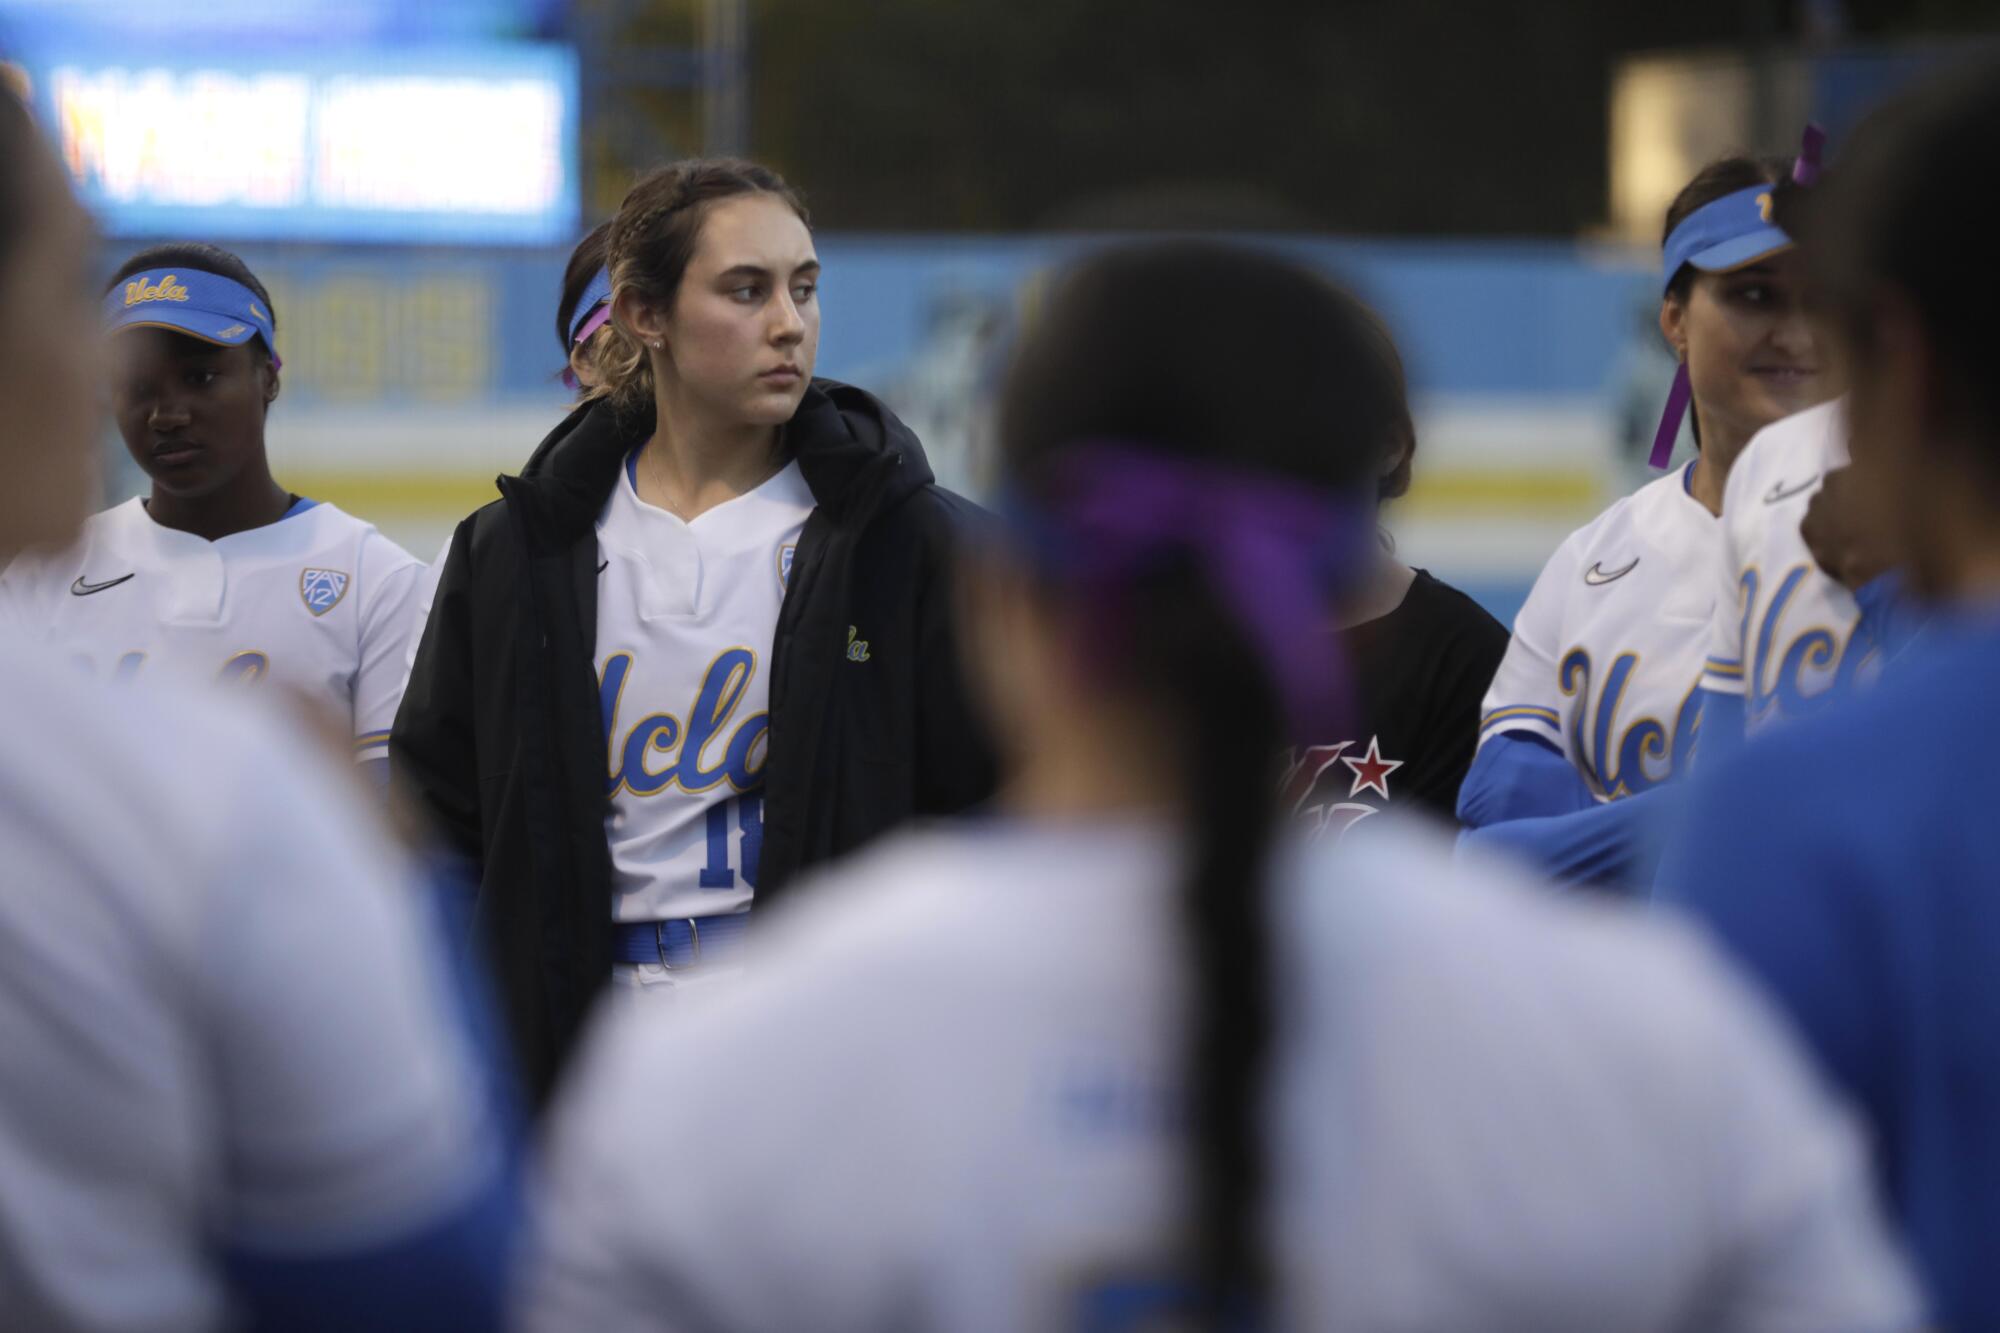 Bruins bullpen catcher Sara Rusconi Vicinanza, in black coat, hits the field with the team before a game against Utah.